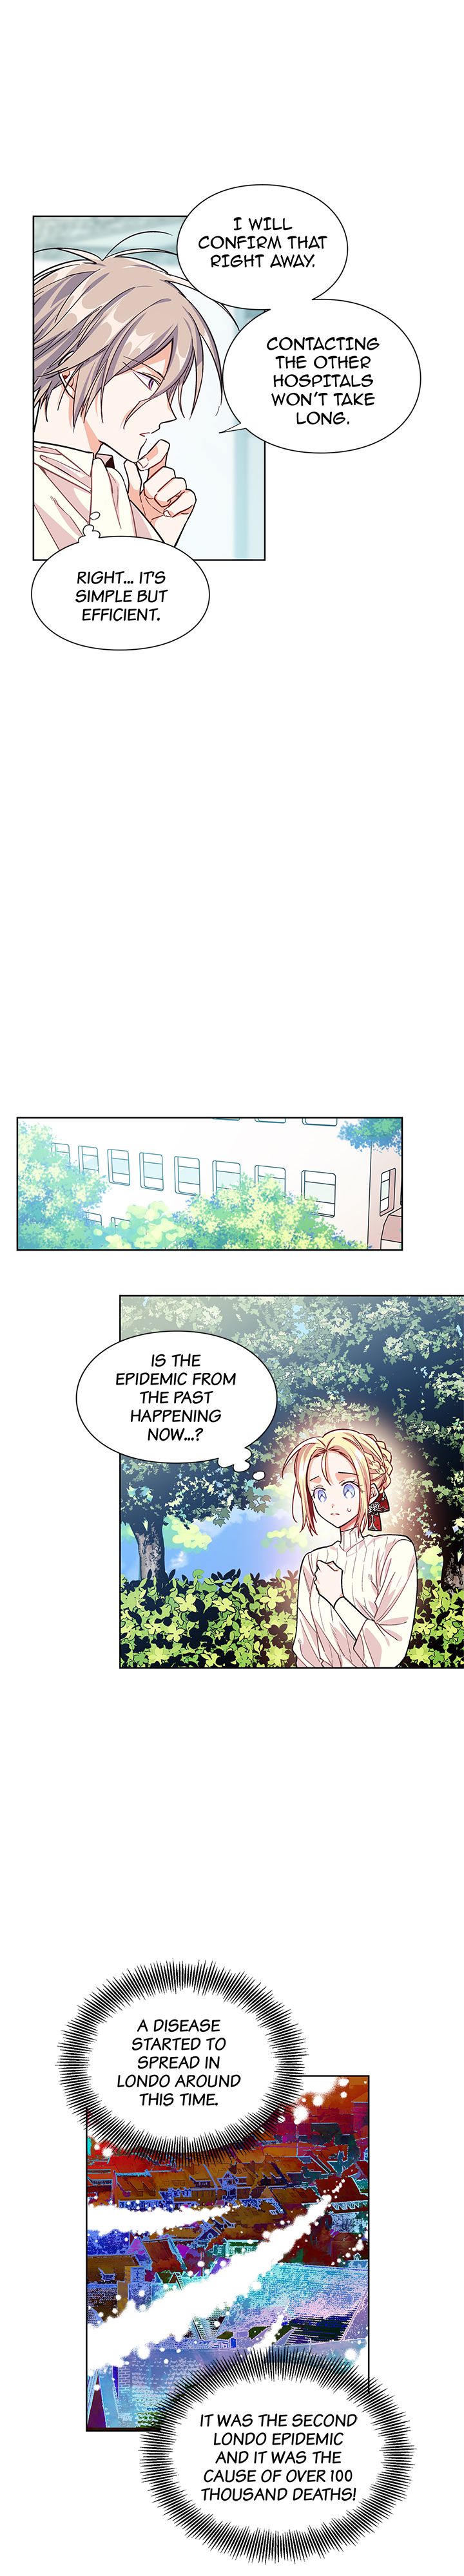 Doctor Elise - The Royal Lady with the Lamp - Chapter 42 Page 13